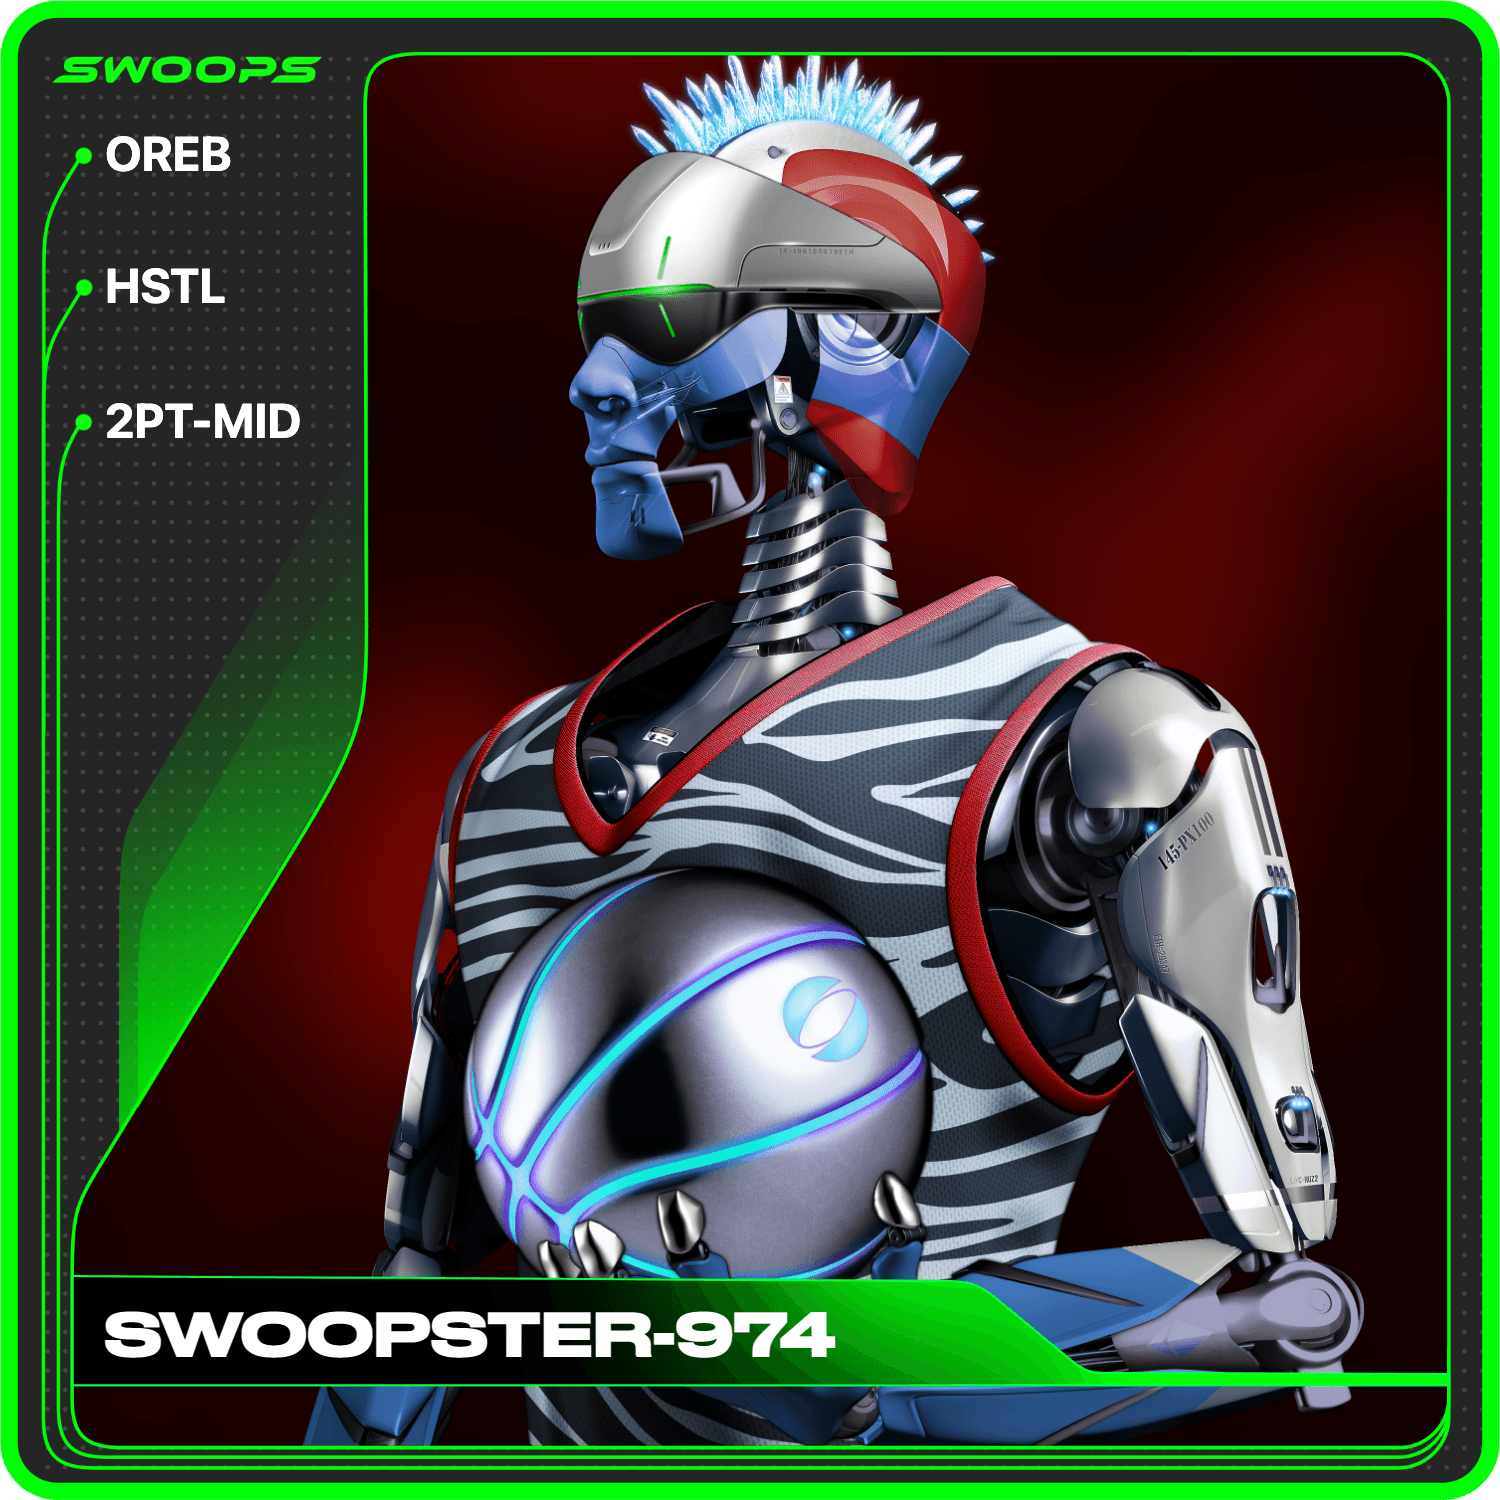 SWOOPSTER-974